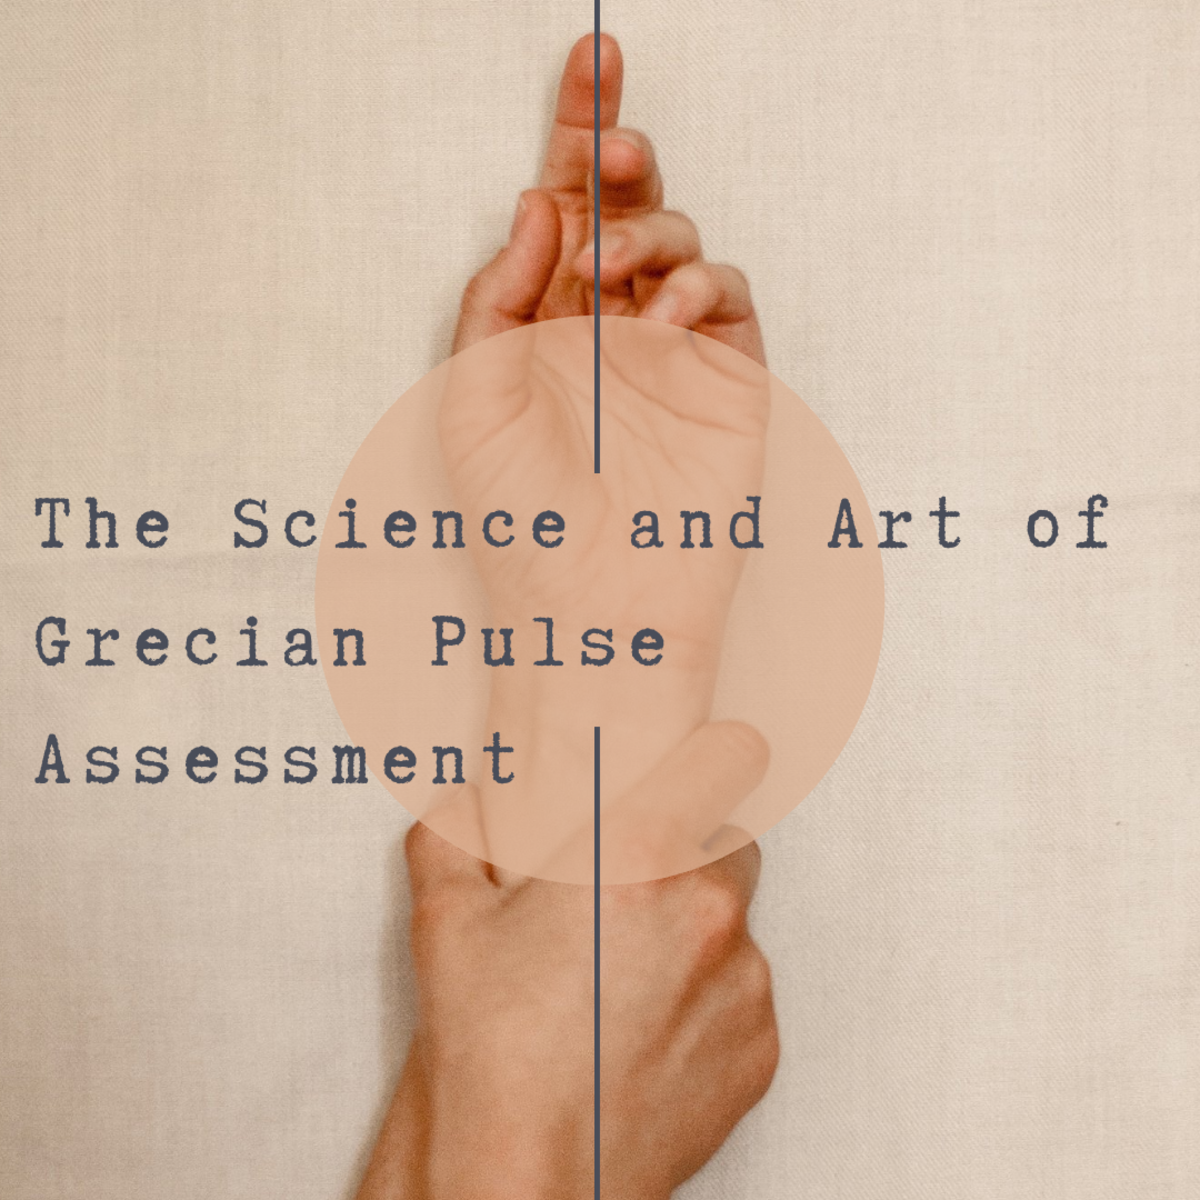 The Science and Art of Pulse Assessment in Greek (Unani) System of Medicine